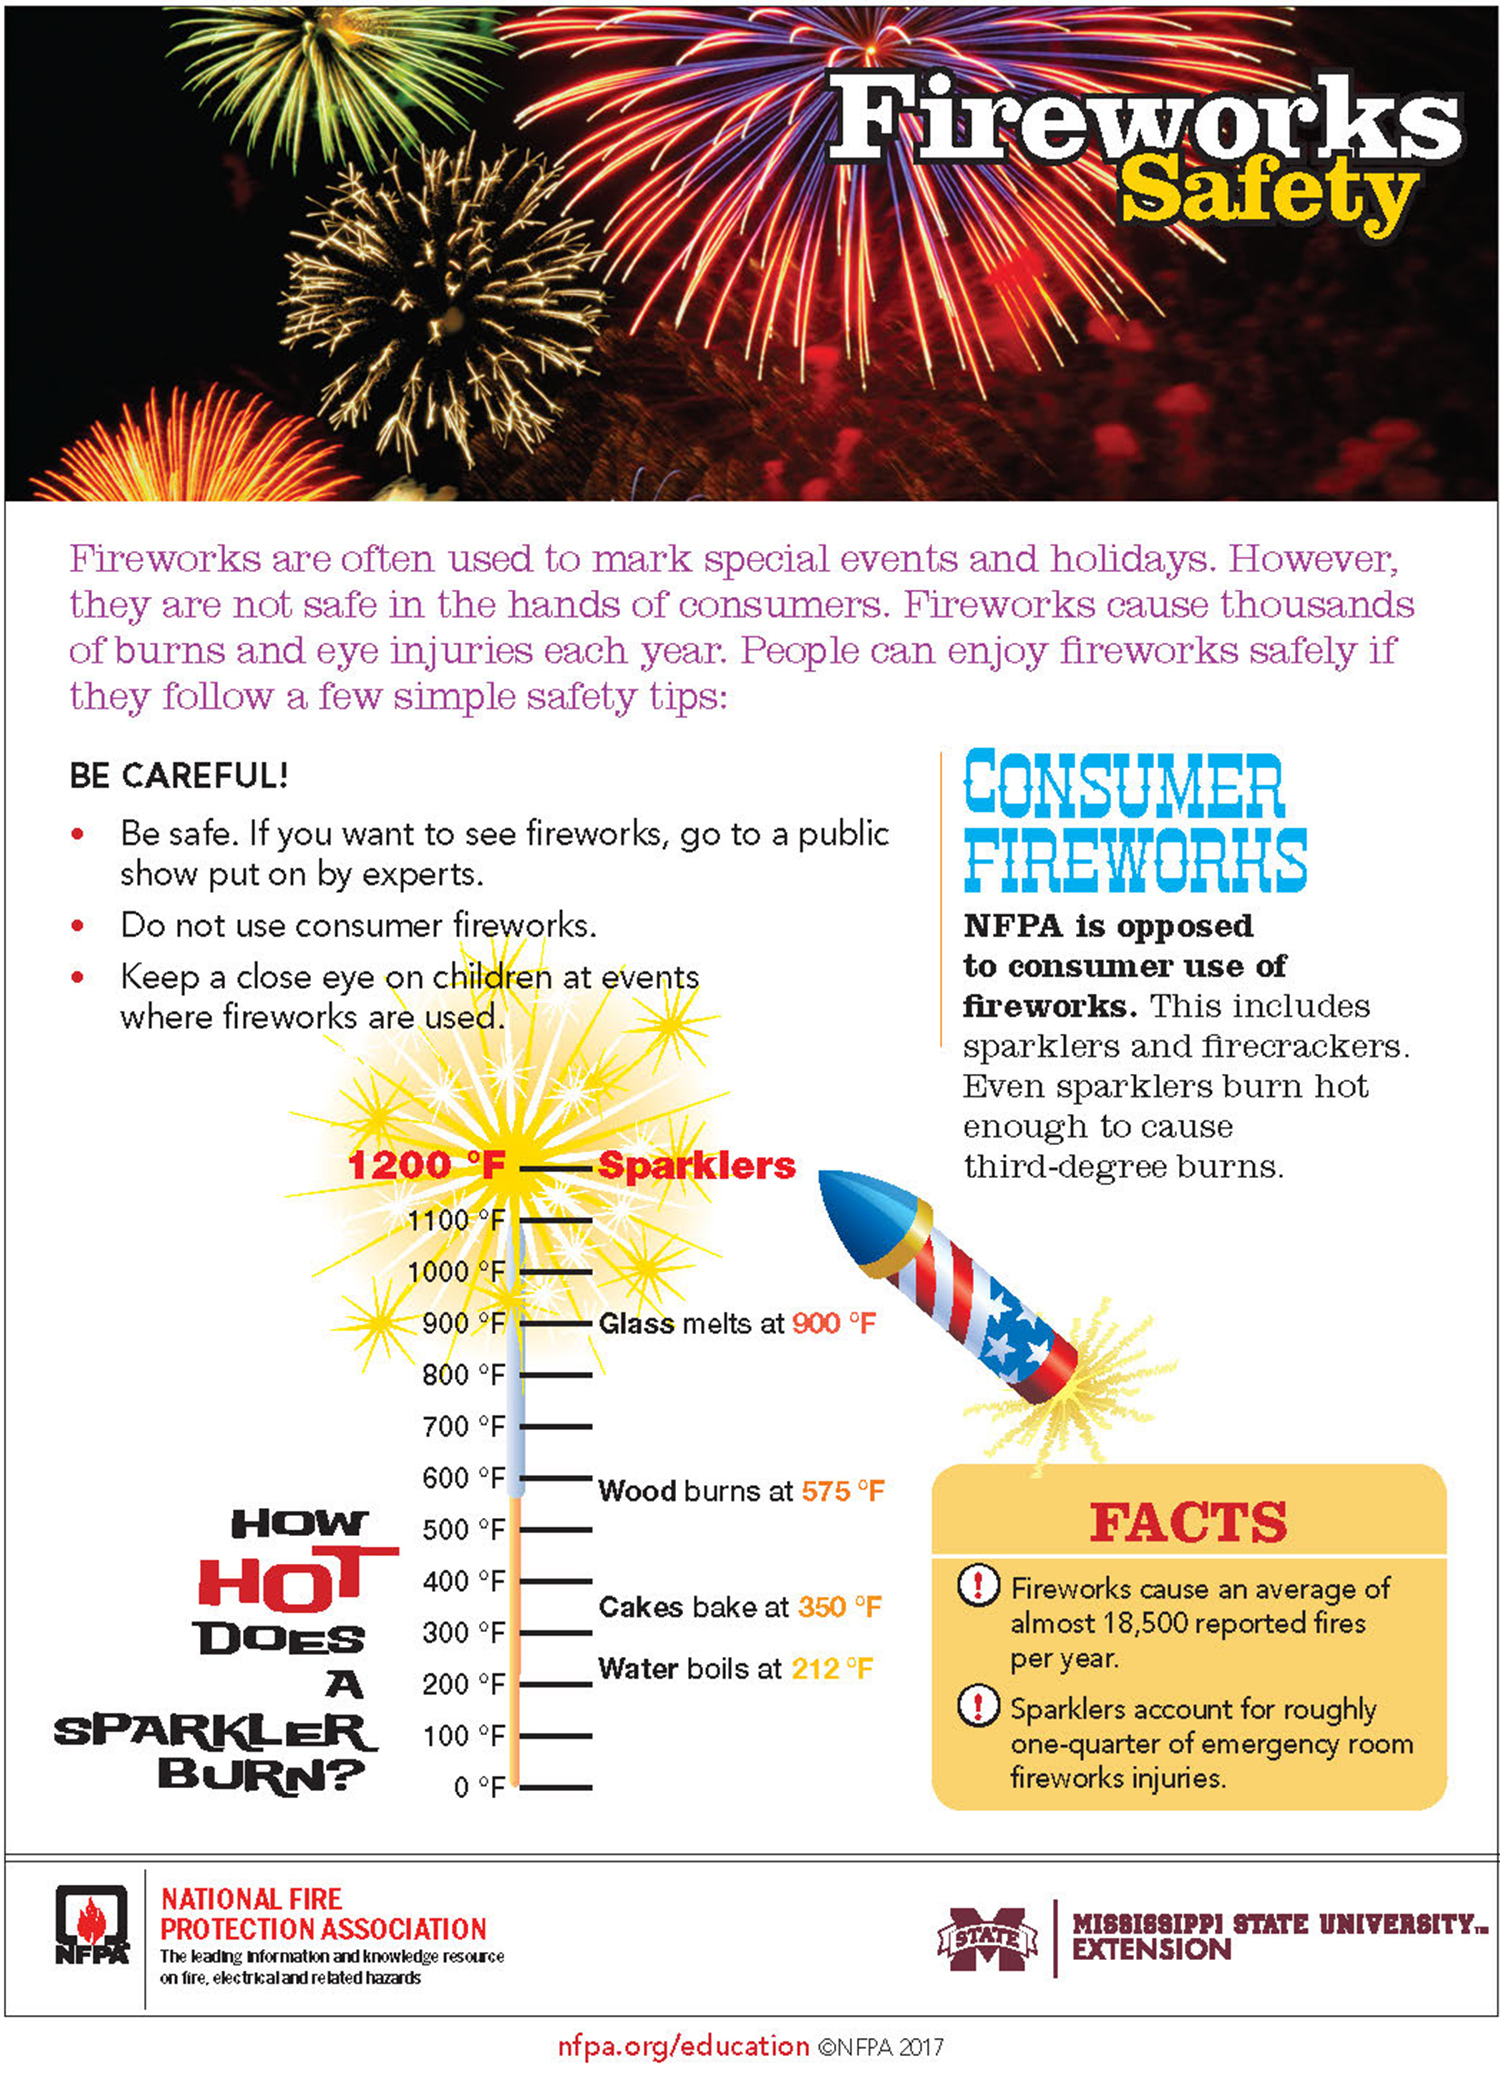 An illustration of a thermometer depicts how hot sparklers get and advises people to enjoy public firework displays rather than use consumer fireworks because of the danger of burns.  